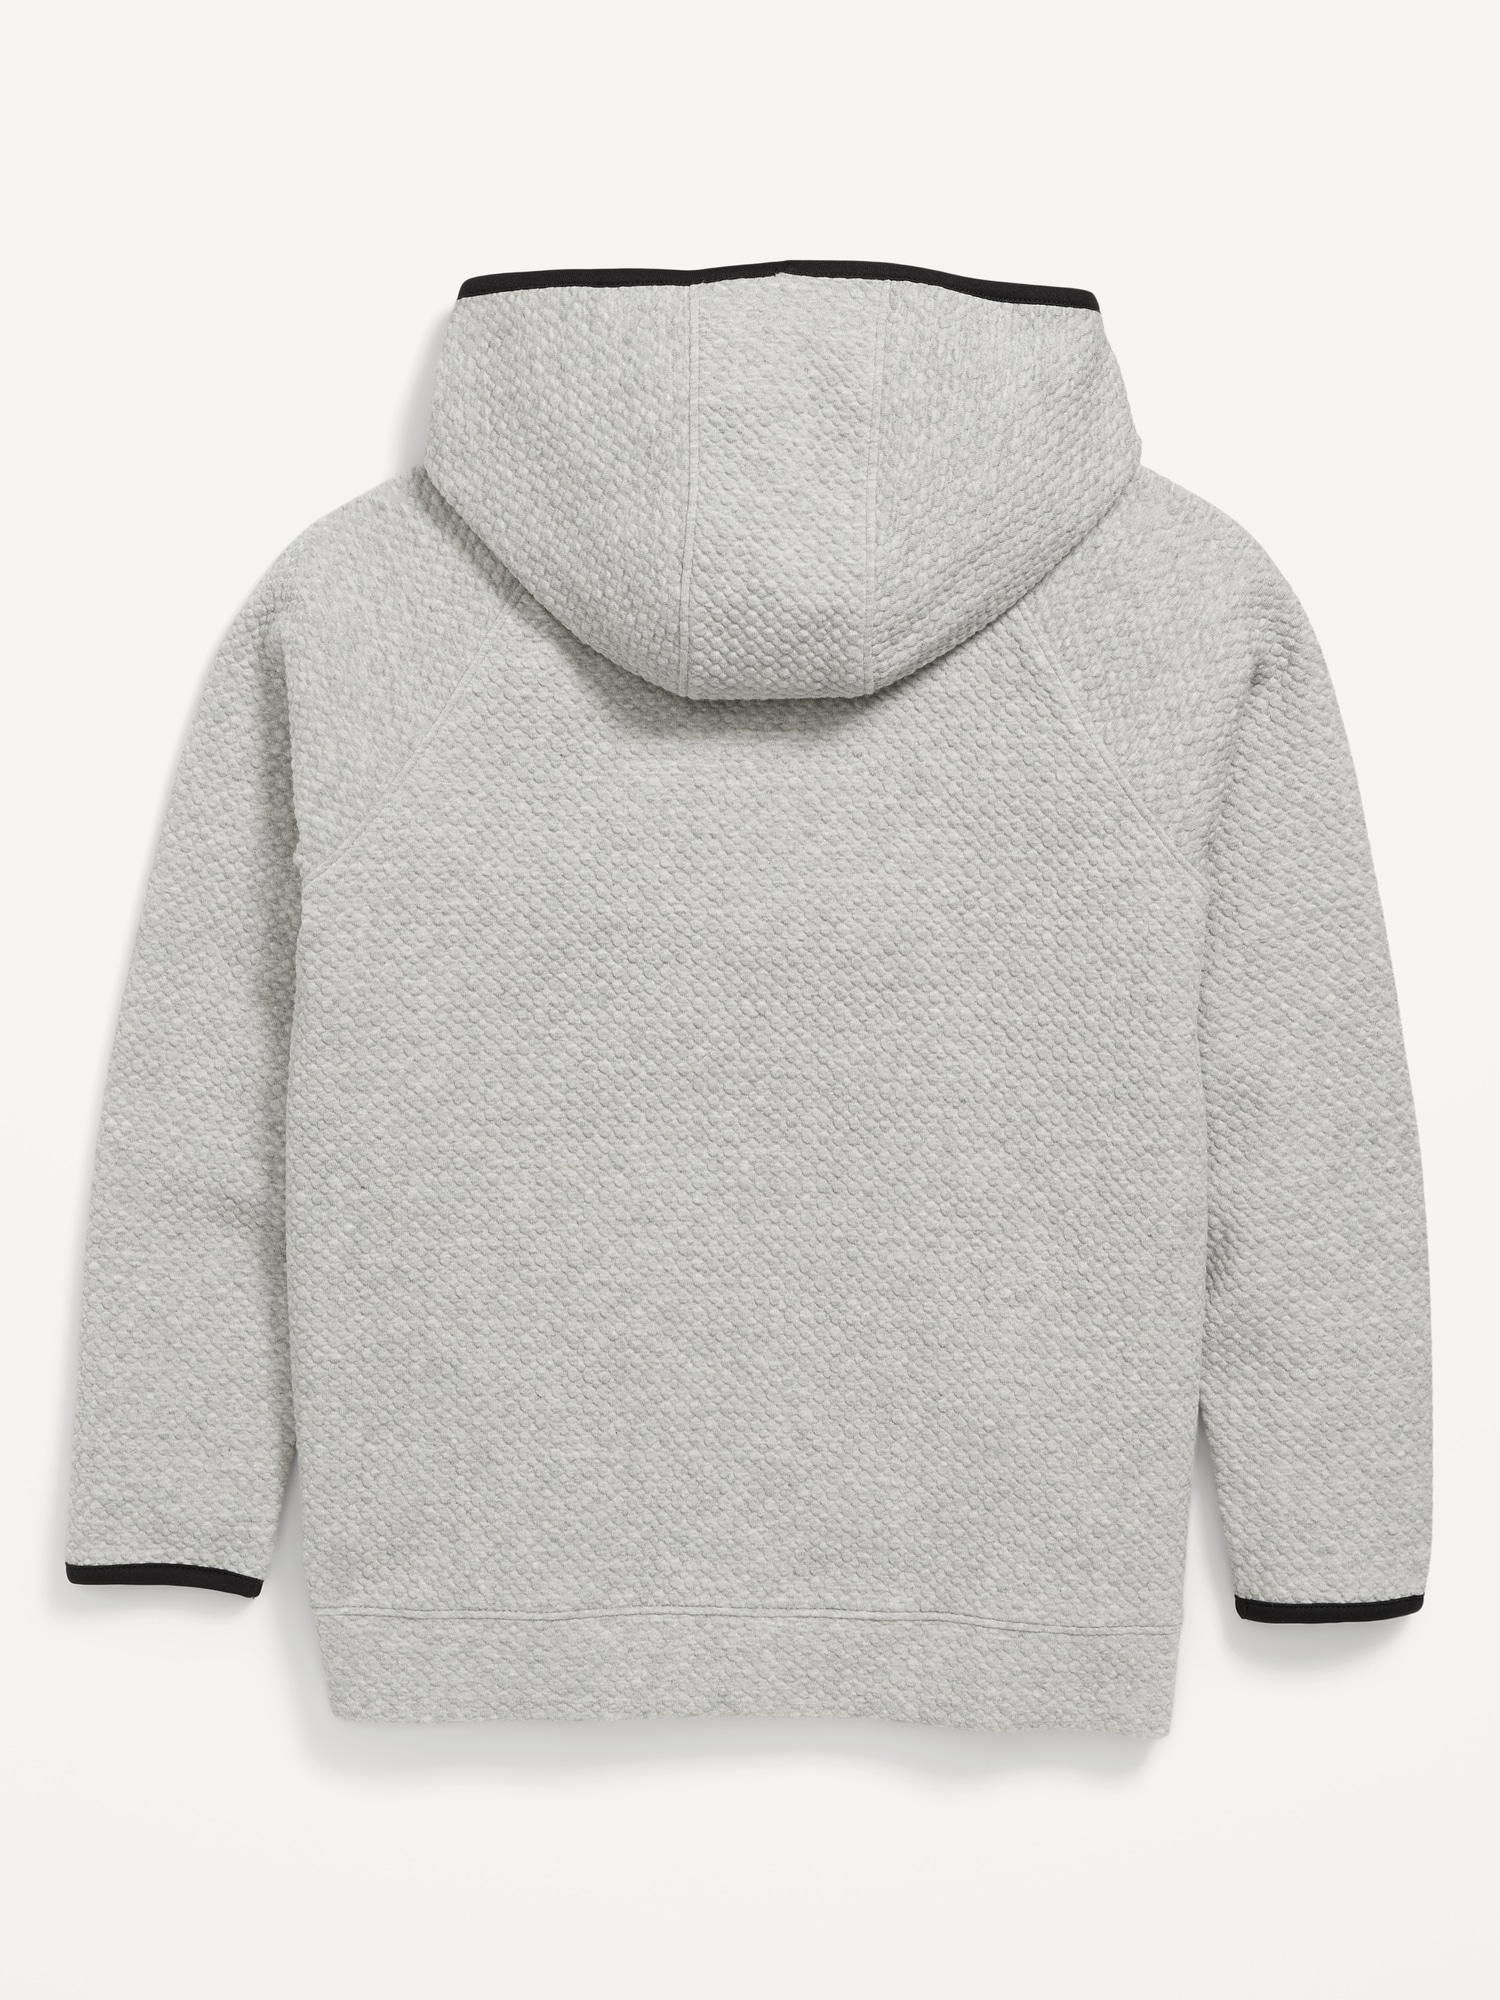 Dynamic Fleece Pullover Hoodie for Boys | Old Navy